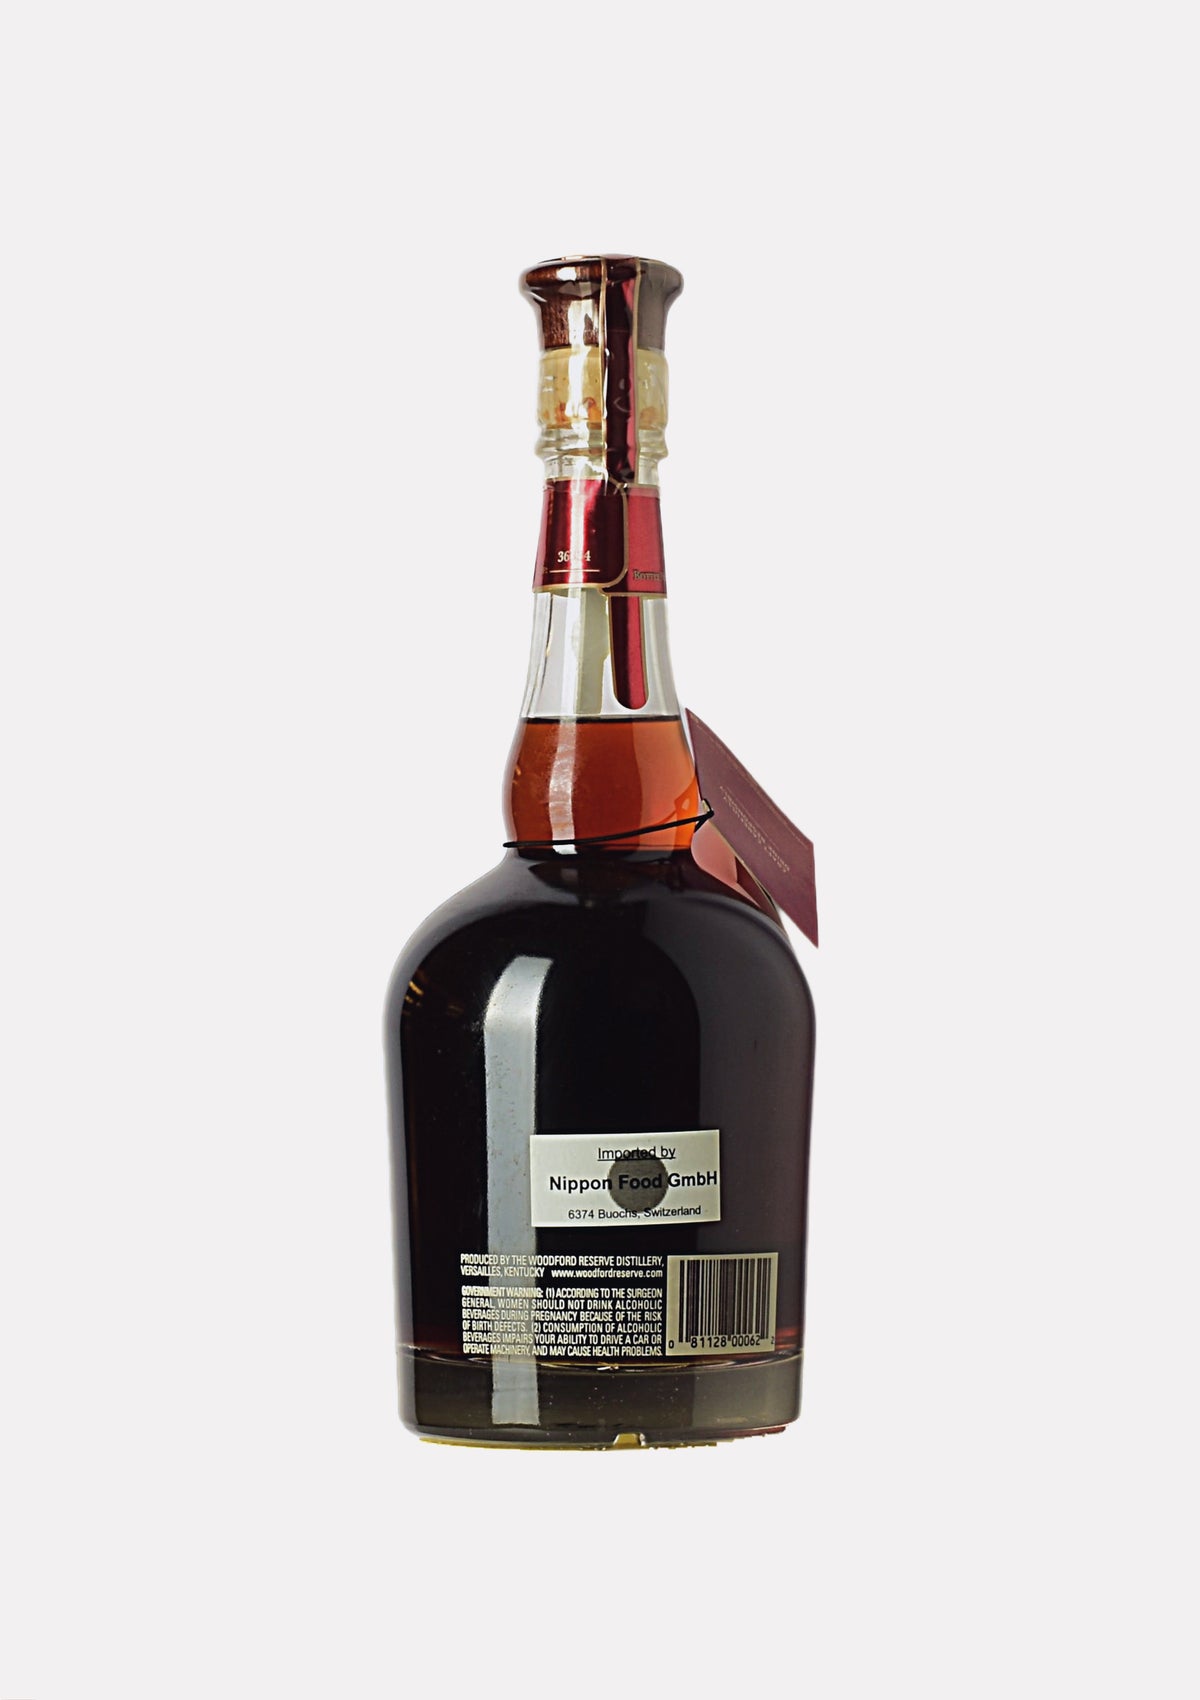 Woodford Reserve Master`s Collection Sonoma- Cutrer Finish